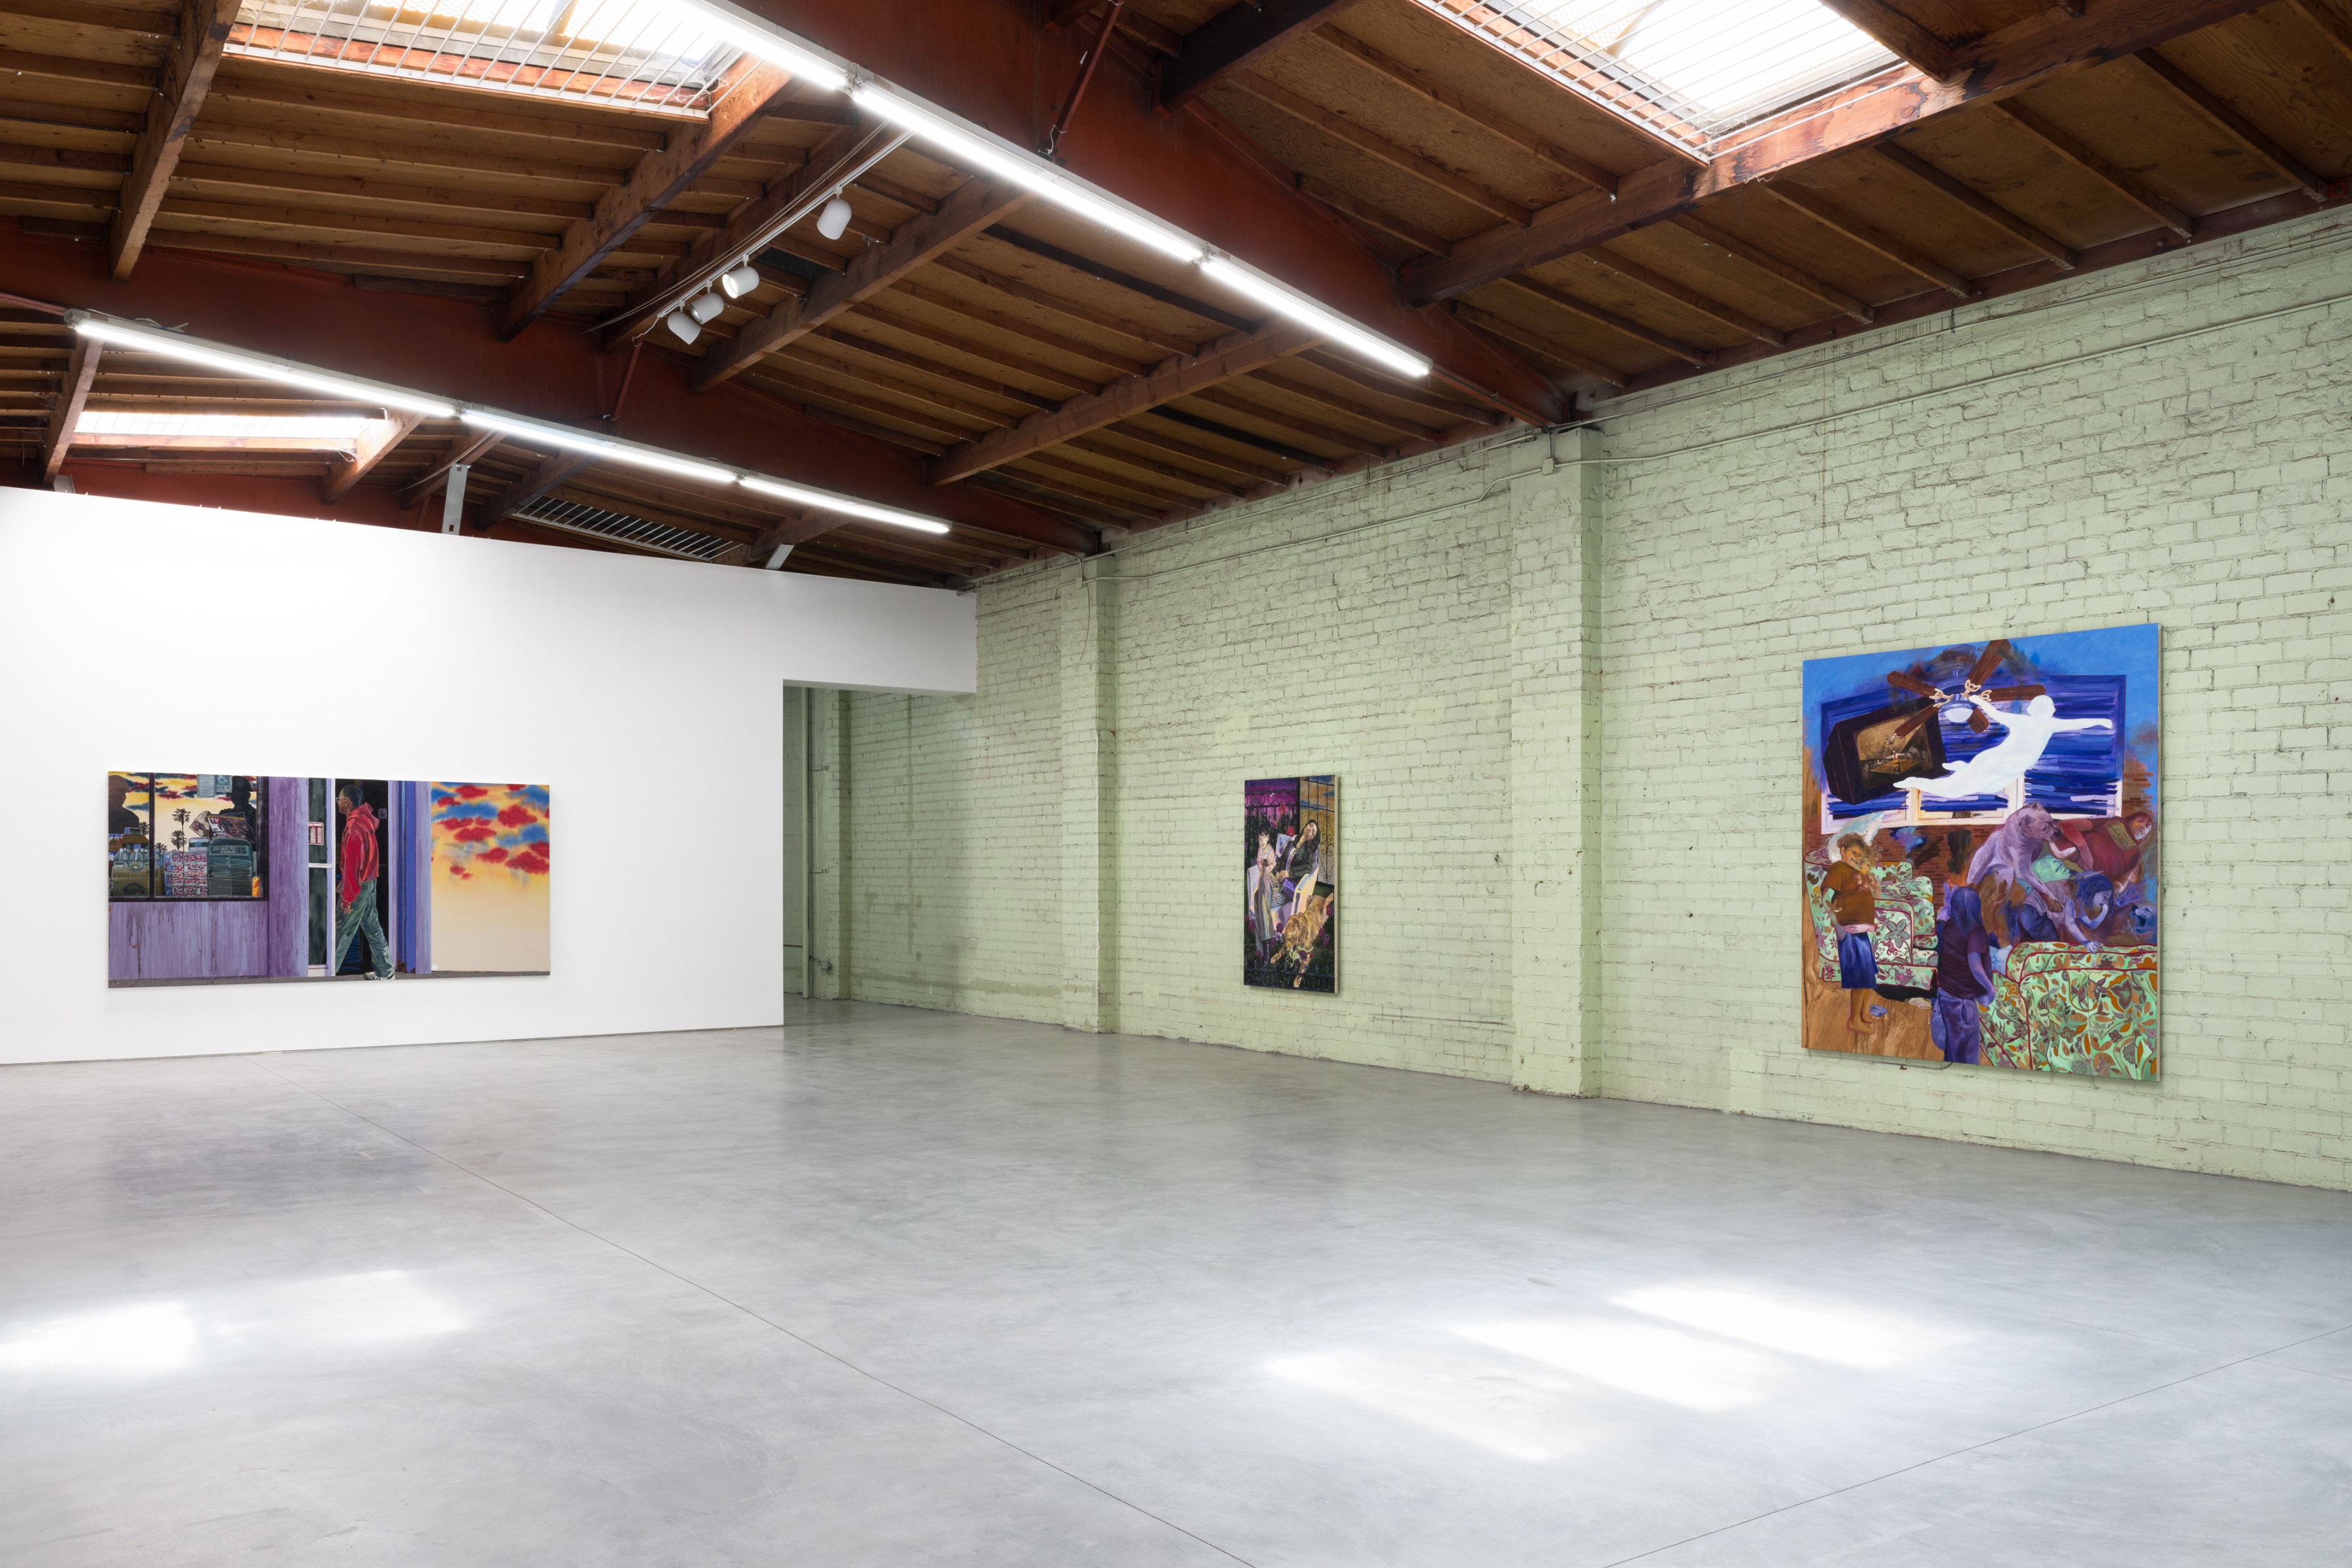 Installation view of "What Will You Give?" by Veronica Fernandez and Tidawhitney Lek at Sidecar Gallery.